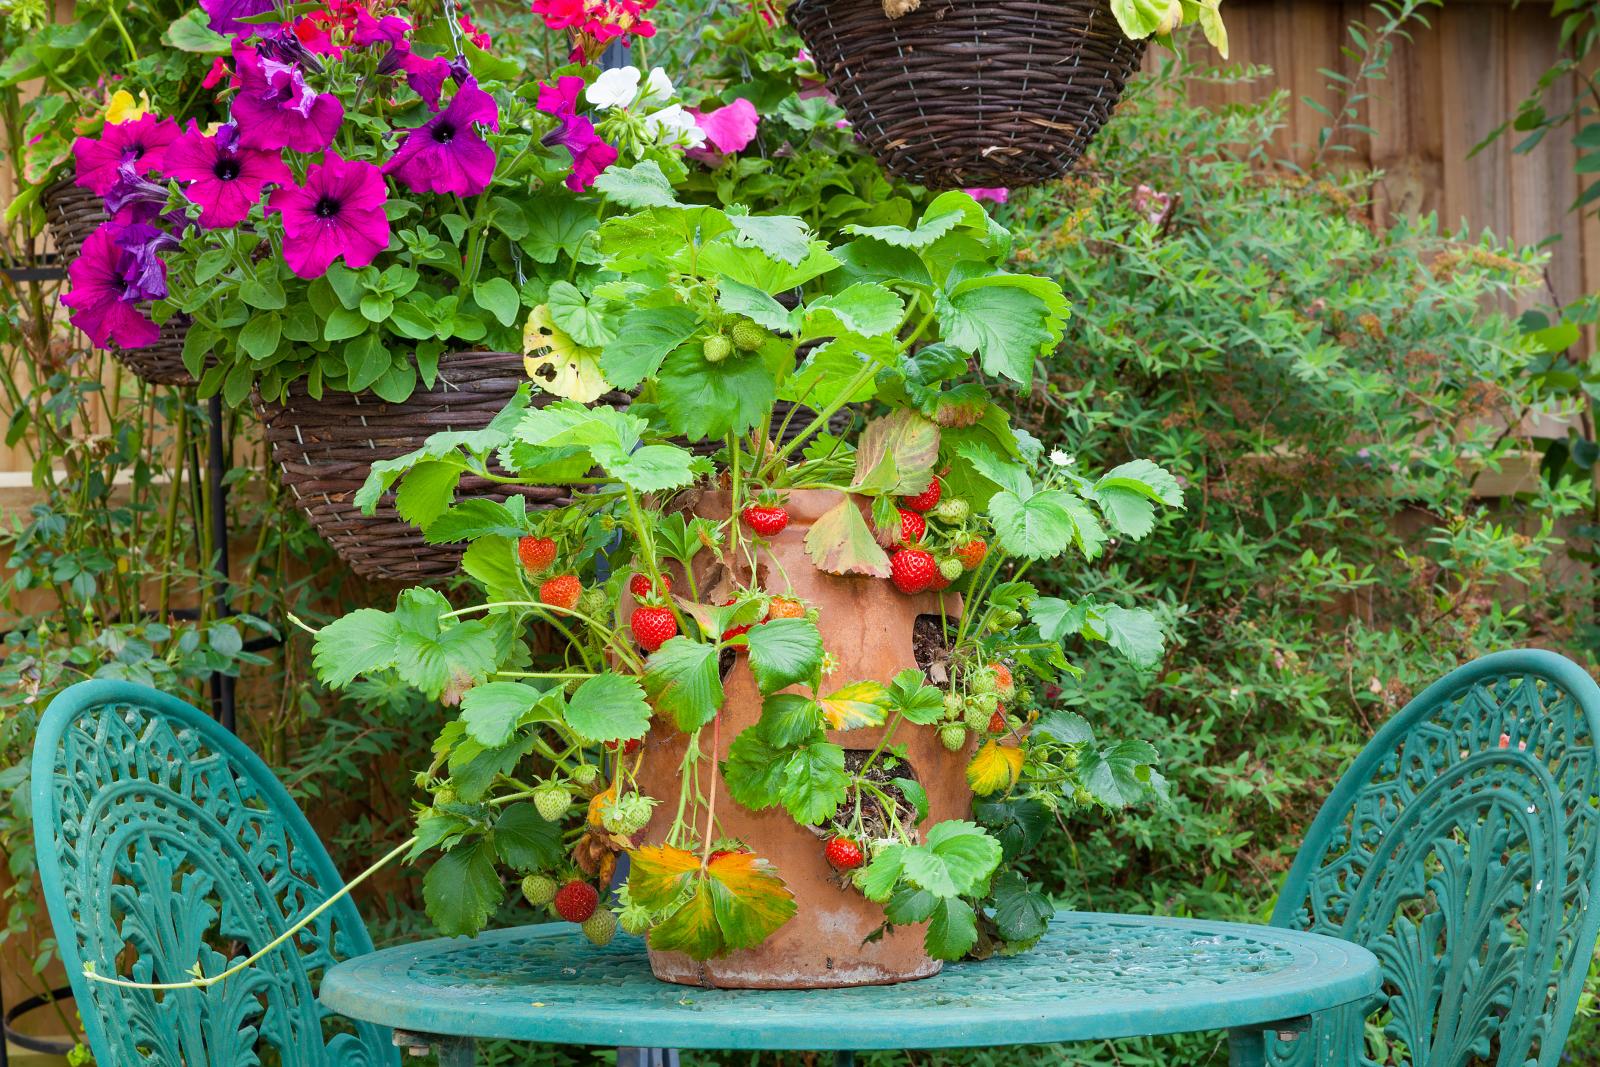 Strawberries in a terracotta planter